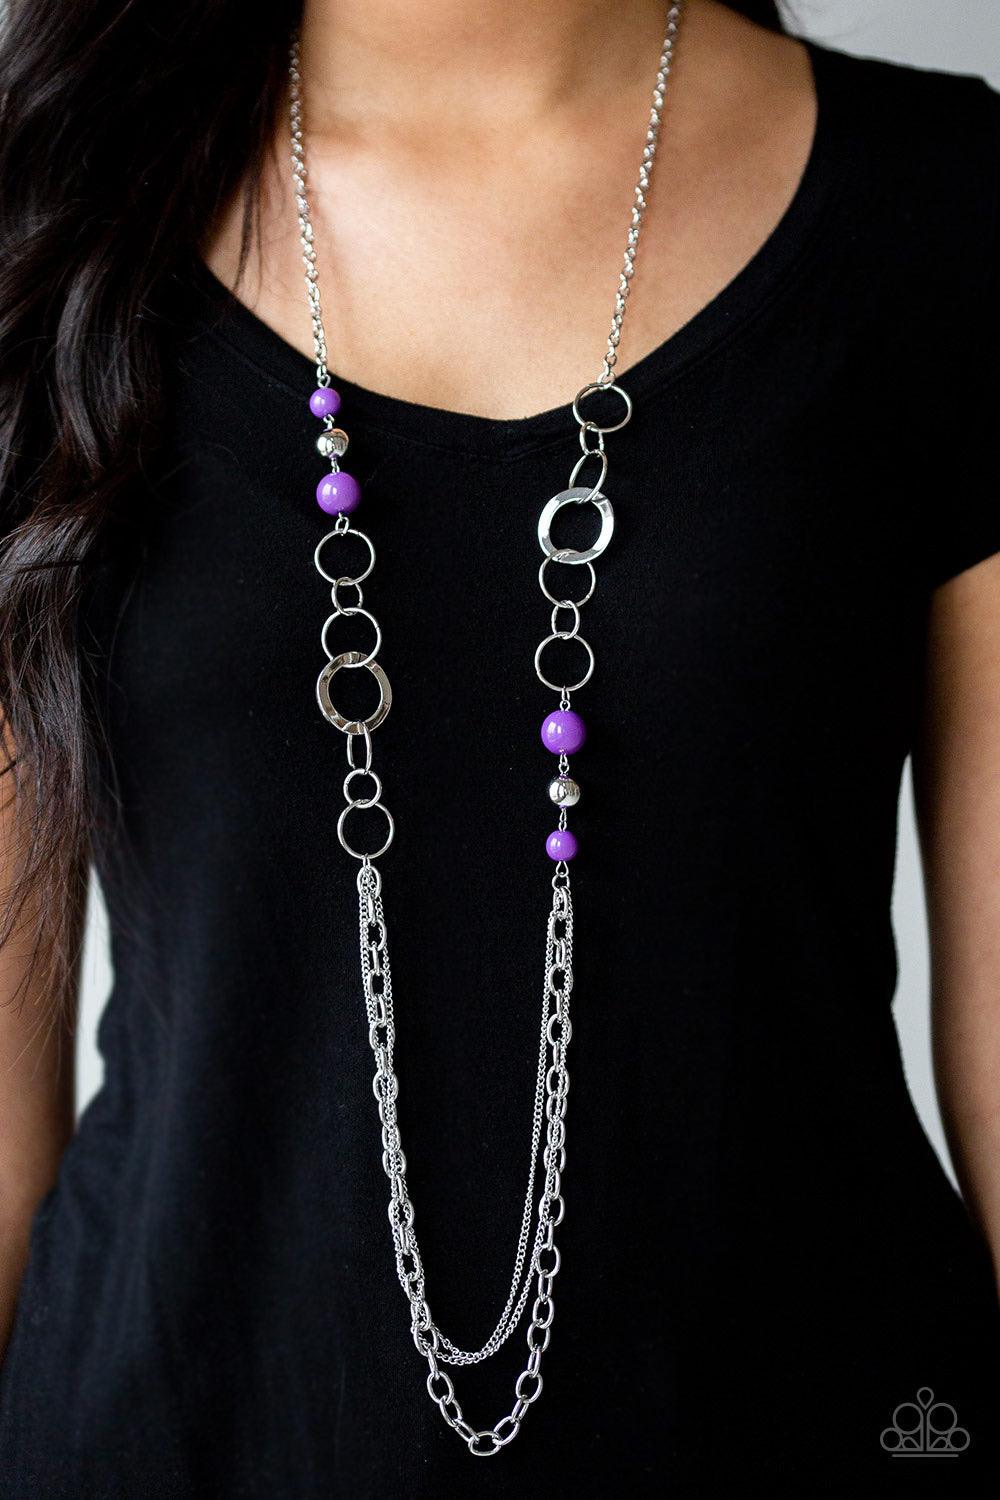 Paparazzi Accessories Modern Motley - Purple Vivacious purple beads, shiny silver beads, and glistening silver hoops give way to layers of mismatched silver chains for a whimsical look. Features an adjustable clasp closure. Sold as one individual necklace